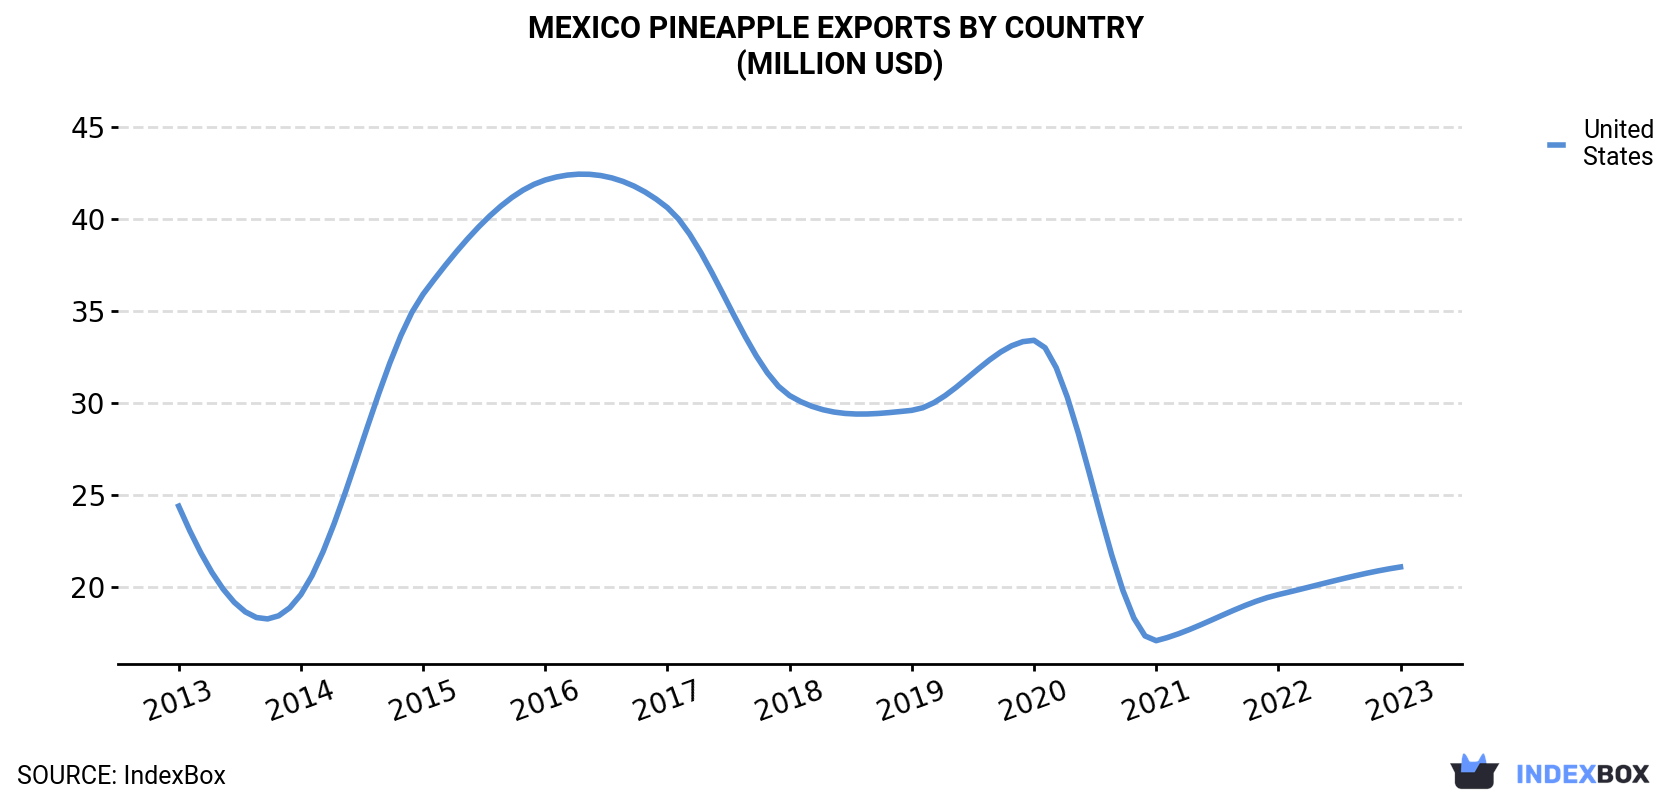 Mexico Pineapple Exports By Country (Million USD)